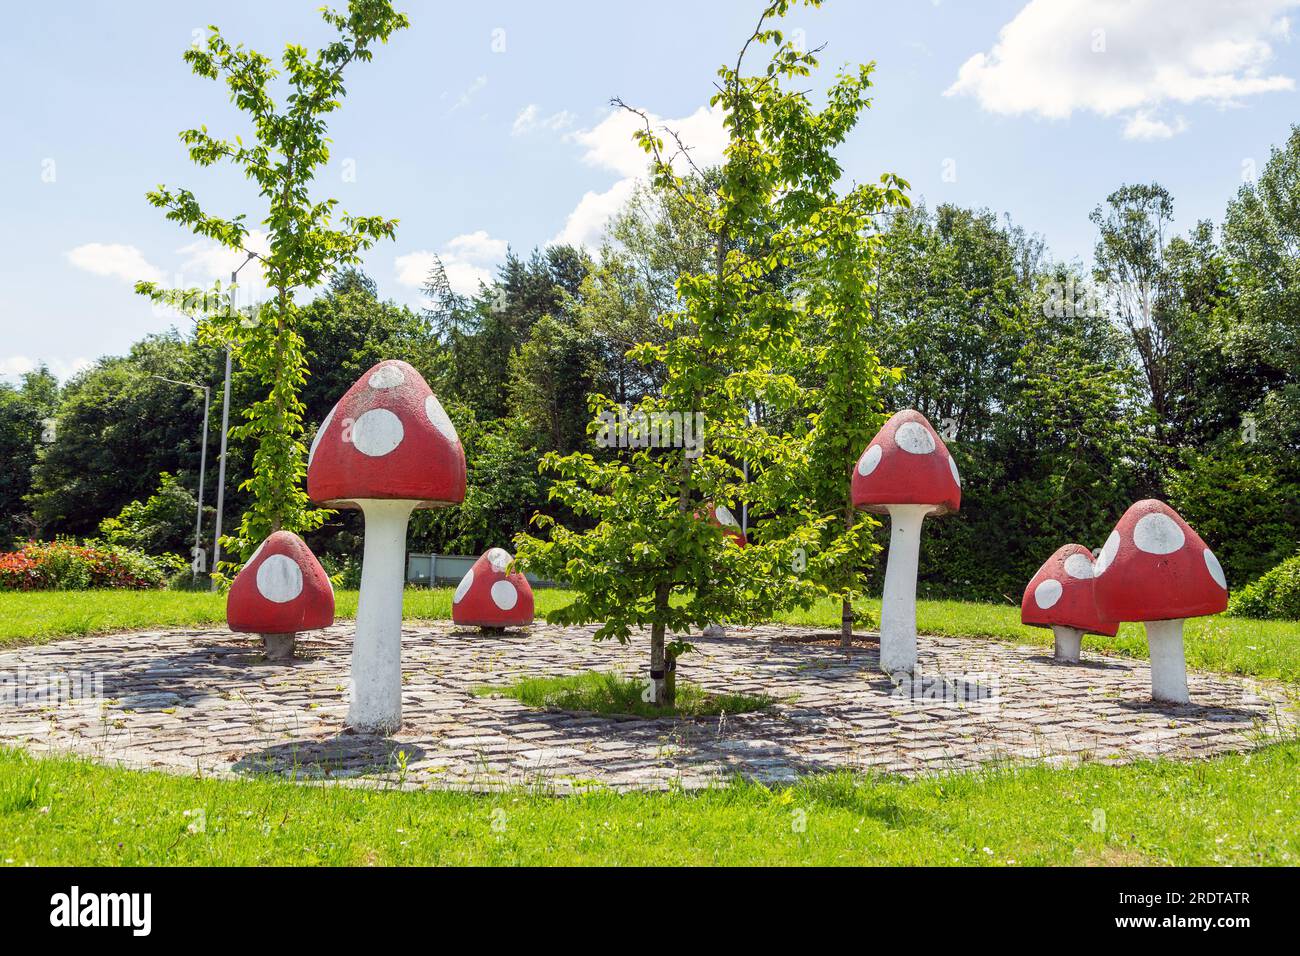 Modern art mushrooms on a roundabout in Glenrothes Fife Scotland. Stock Photo